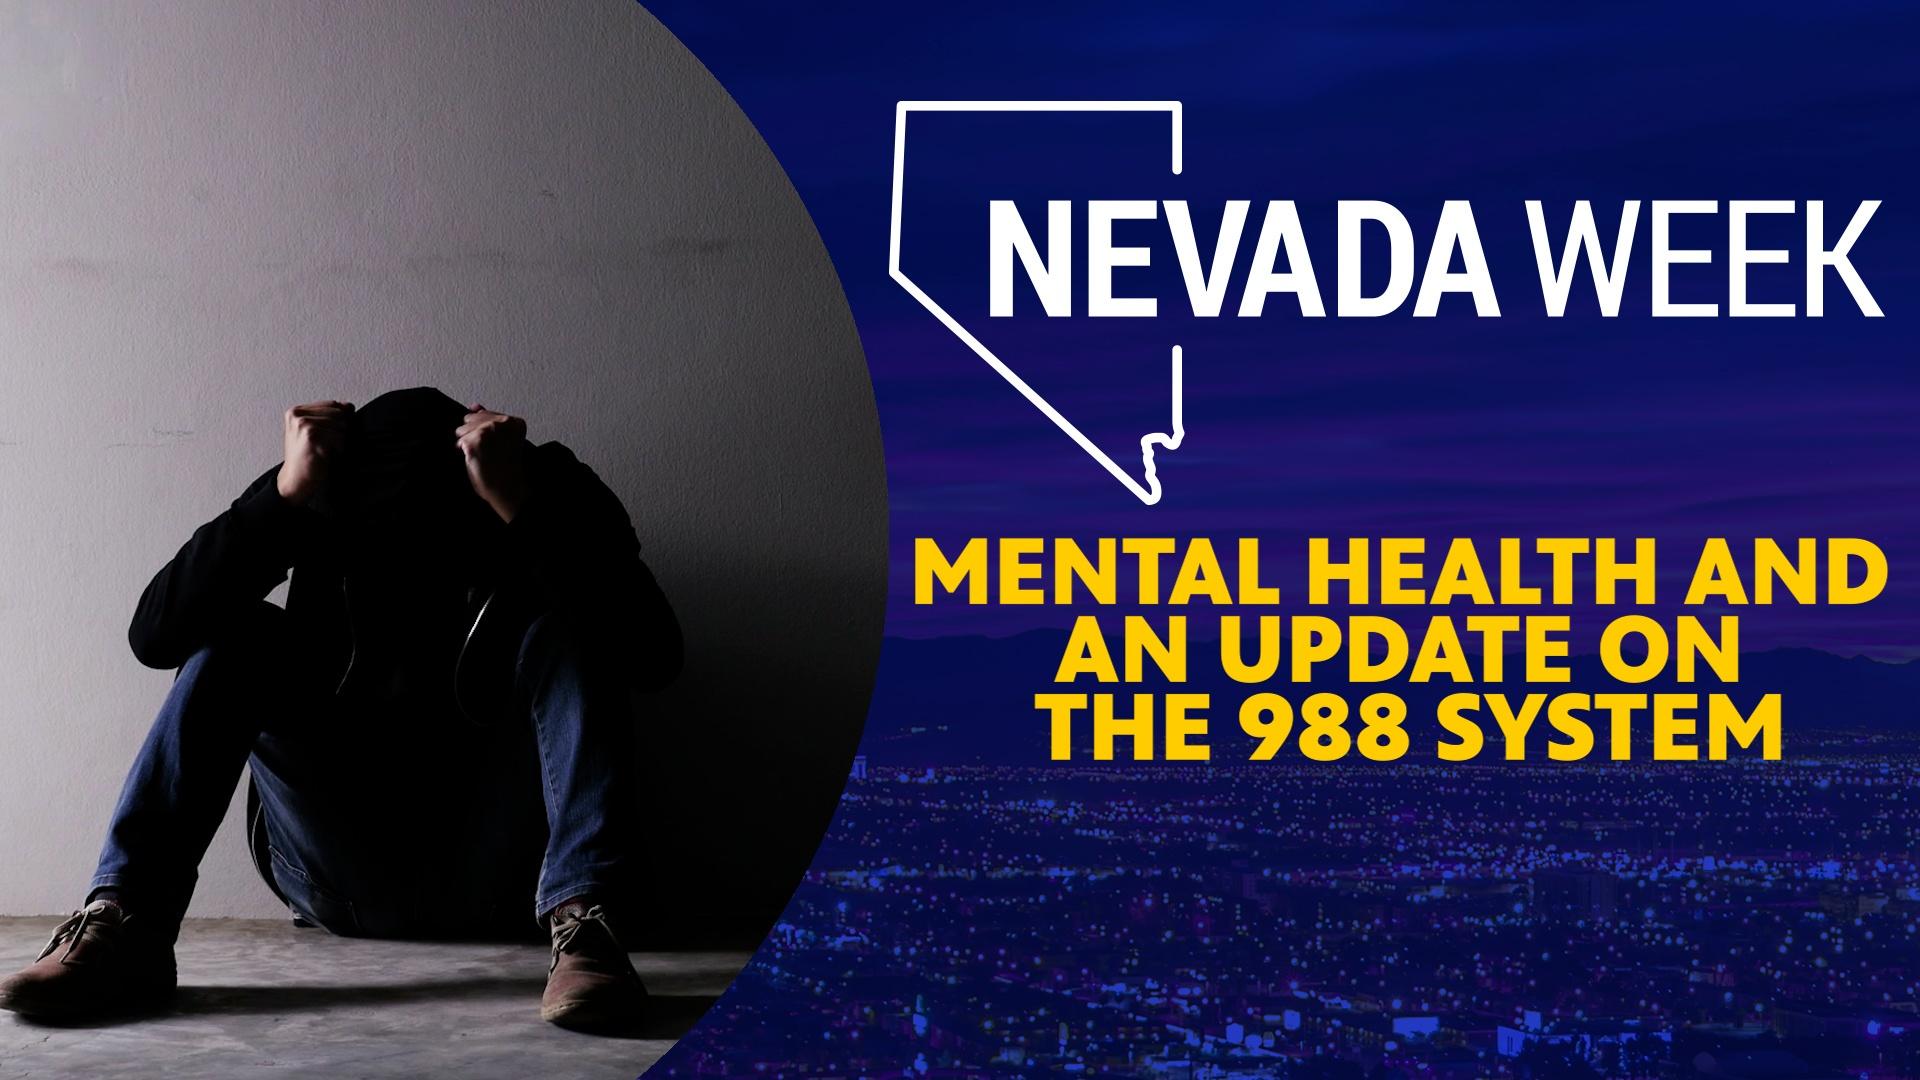 Mental Health and an Update on the 988 System